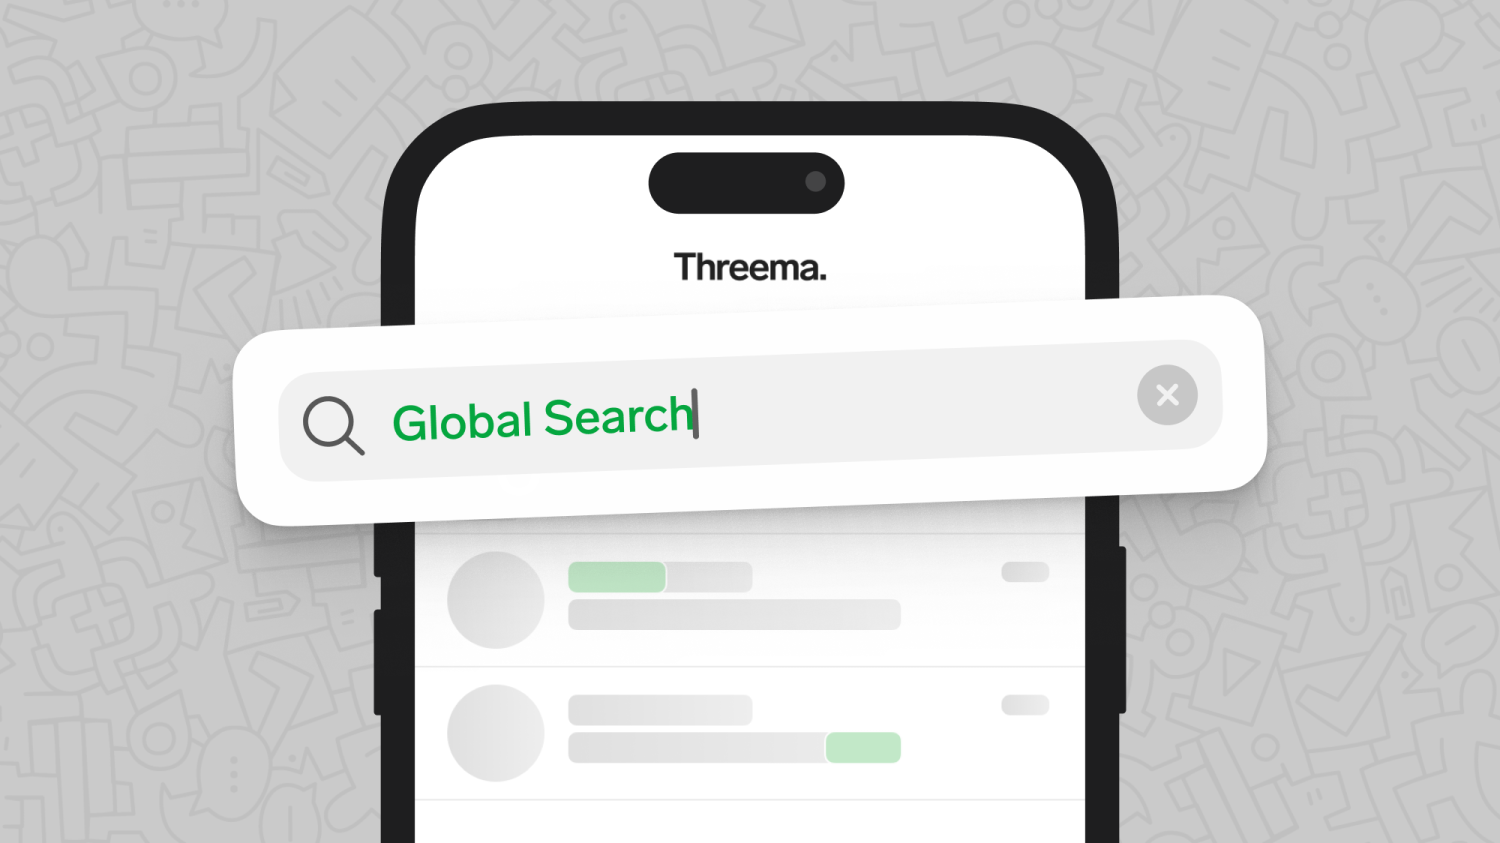 Threema for iOS: Find Messages Across Chats